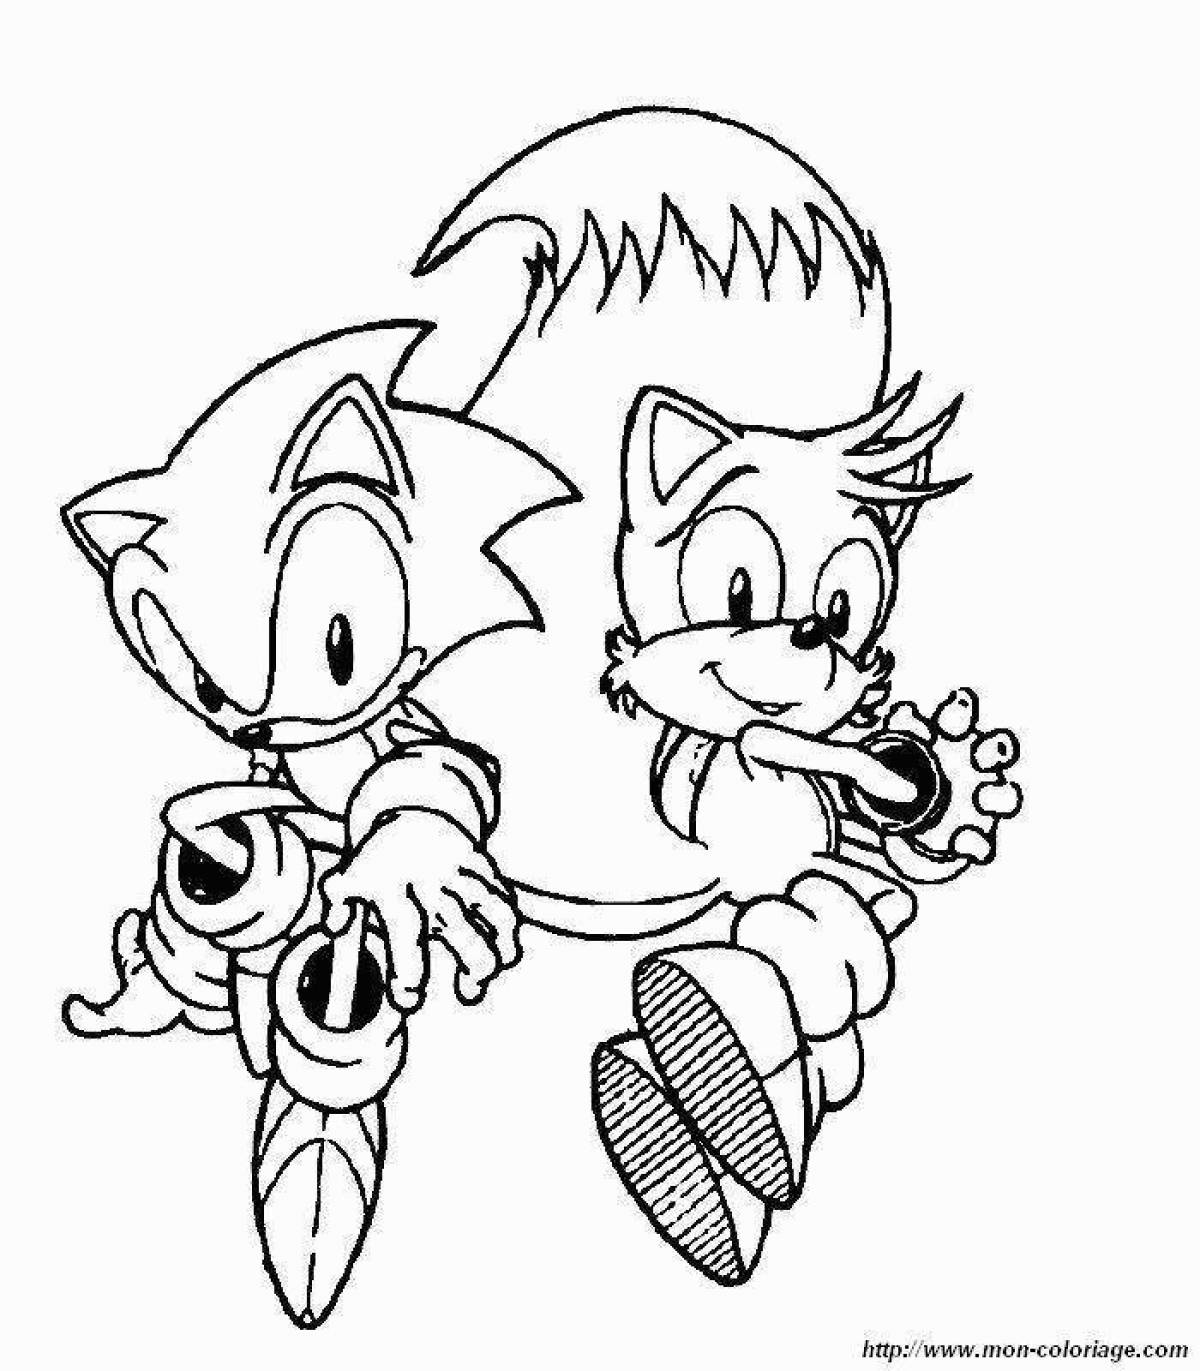 Impressive sonic and tails coloring page